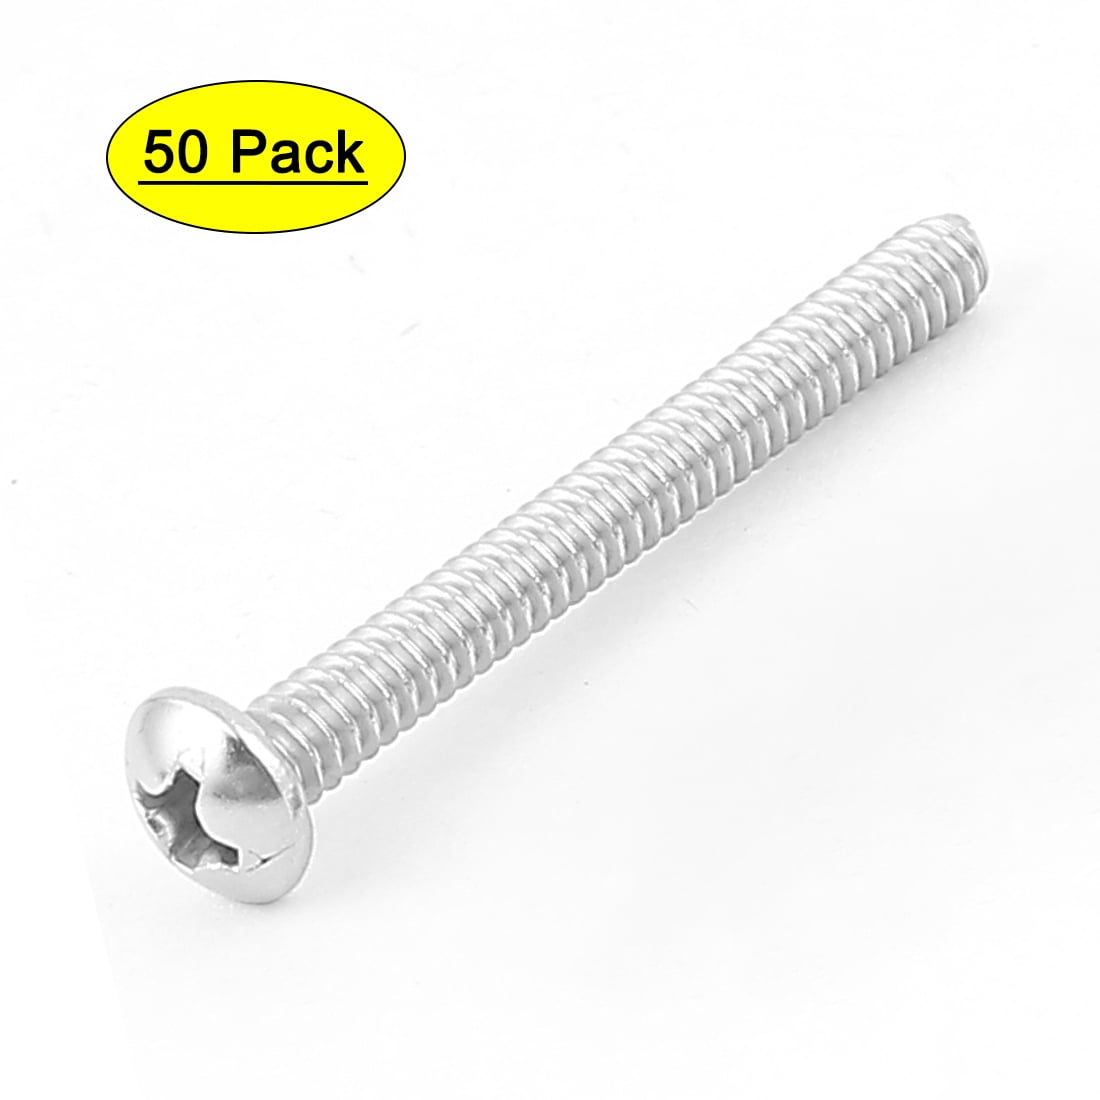 FABORY M51050.060.0040 M6-1.00 x 40mm A2 Stainless Steel Socket Head Cap Screw, 